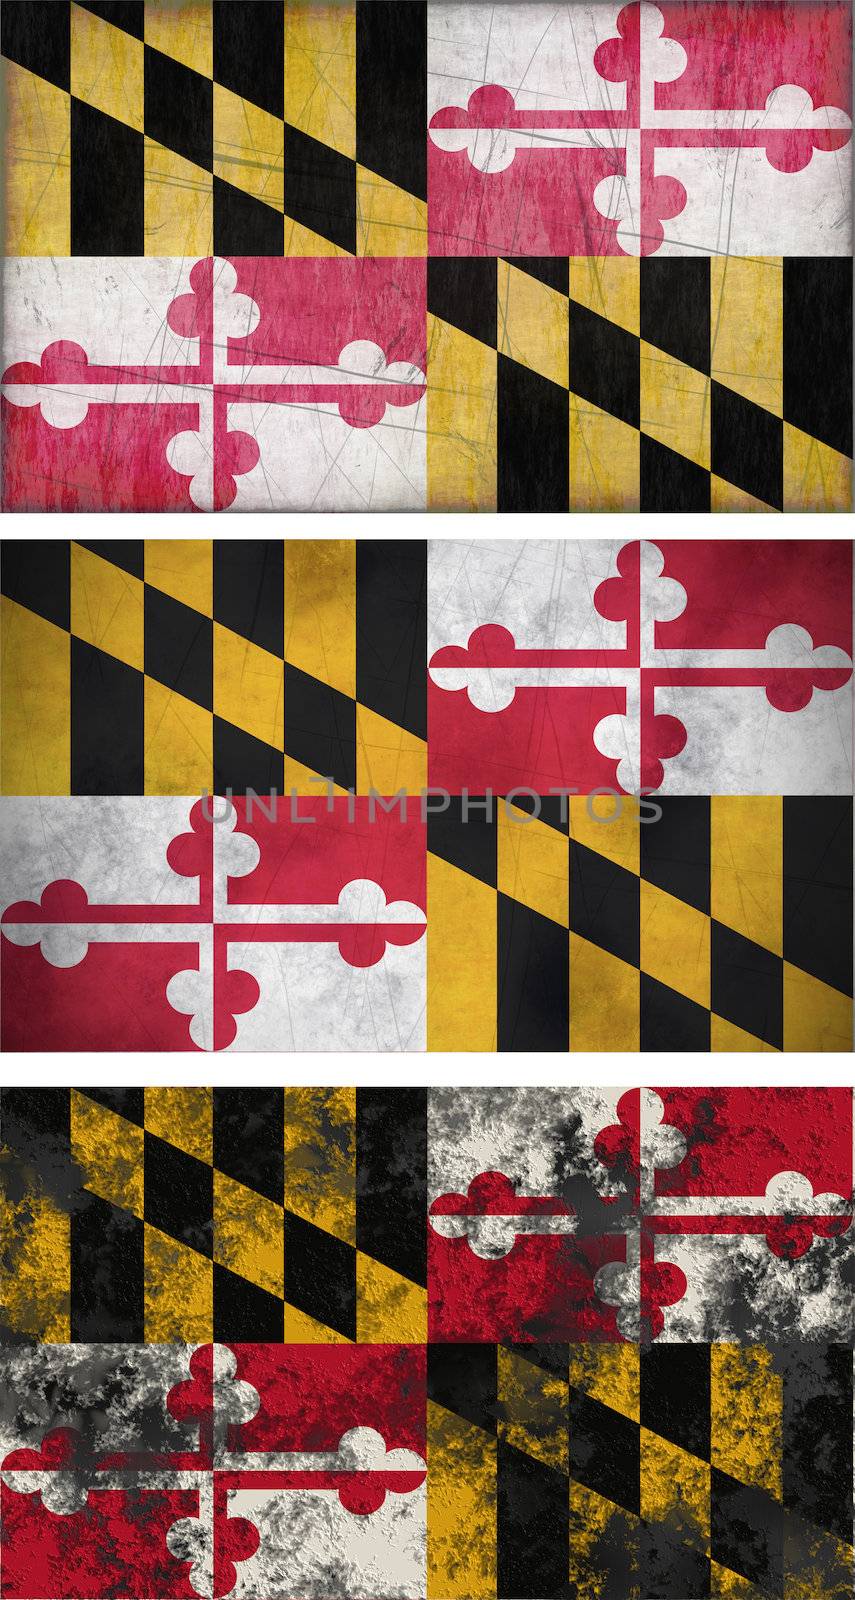 Great Image of the Flag of Maryland